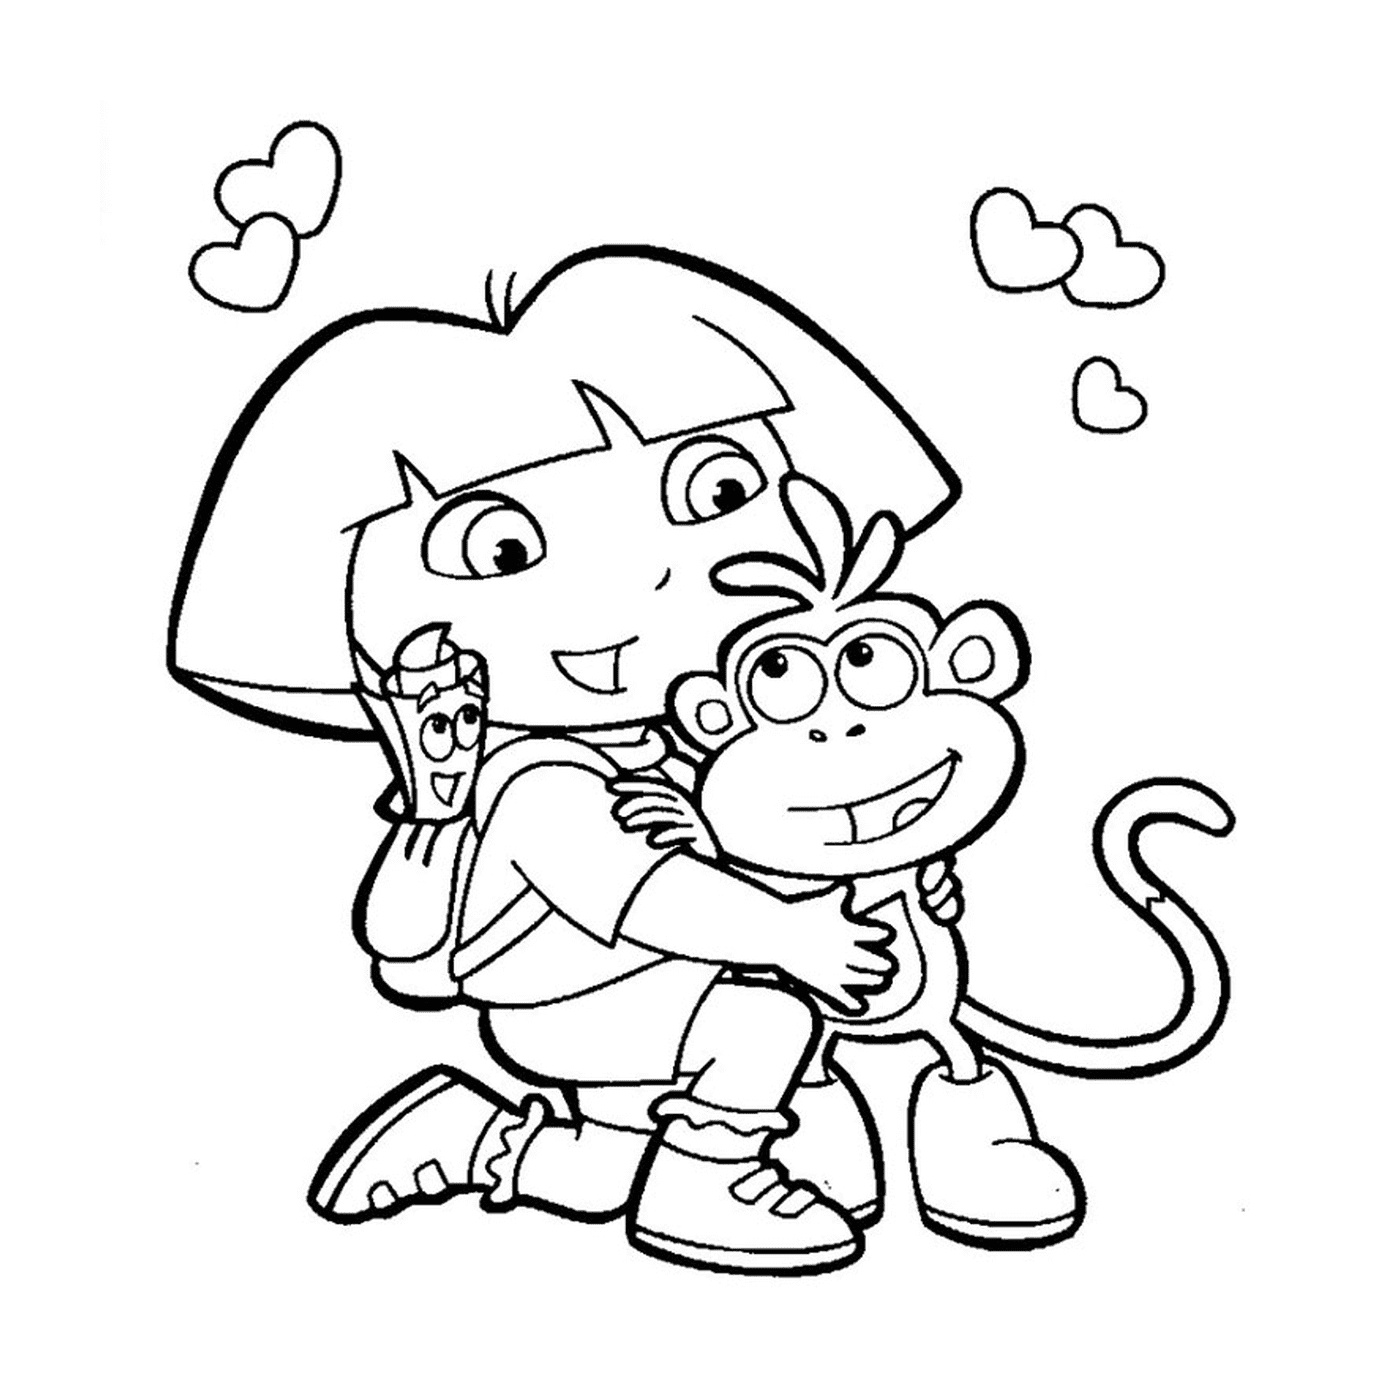  Dora holds a monkey with affection 